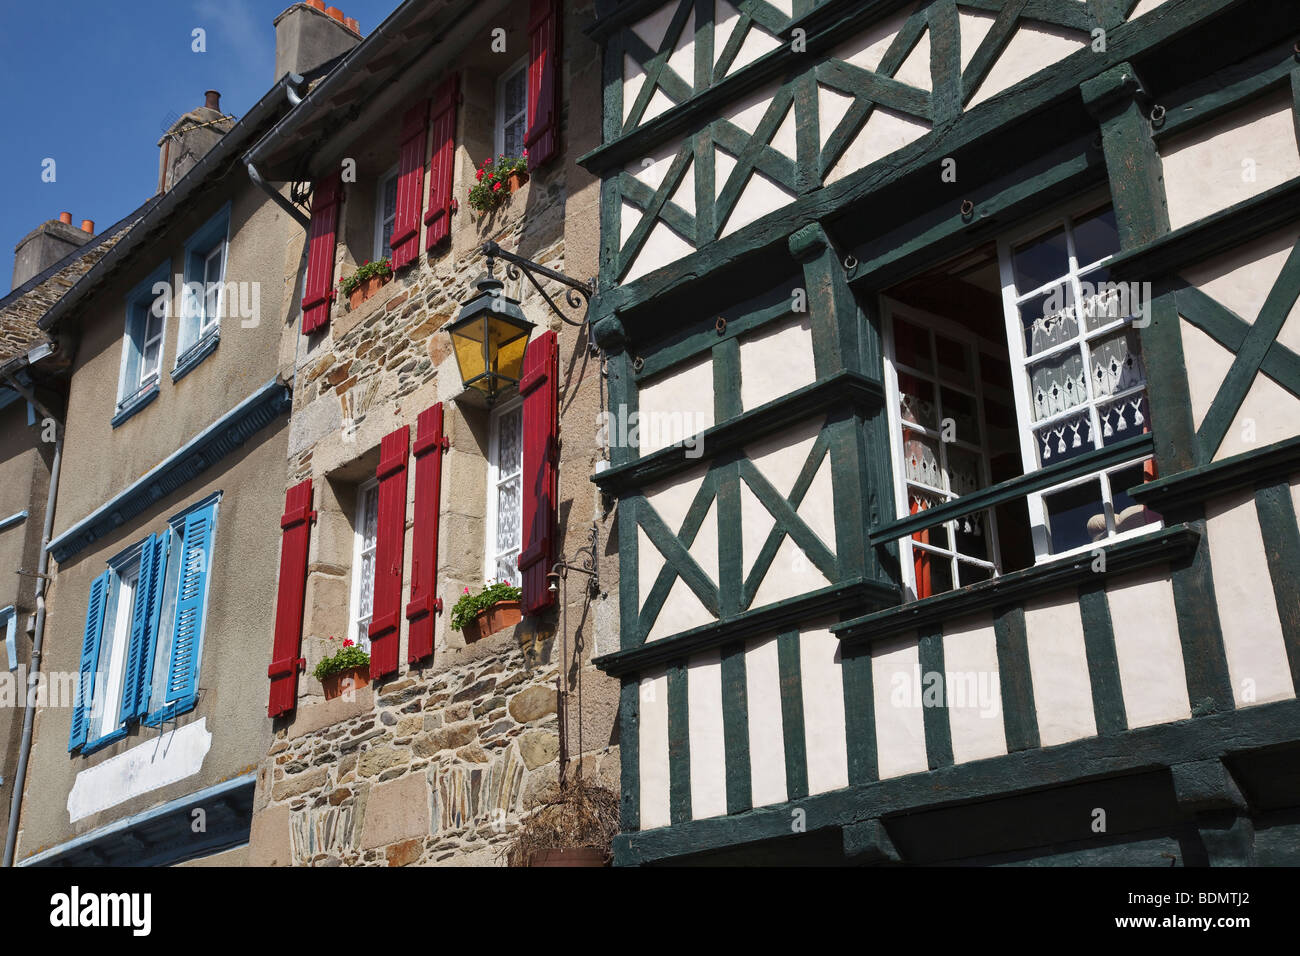 Medieval half-timbered house in Tréguier, Brittany, France Stock Photo